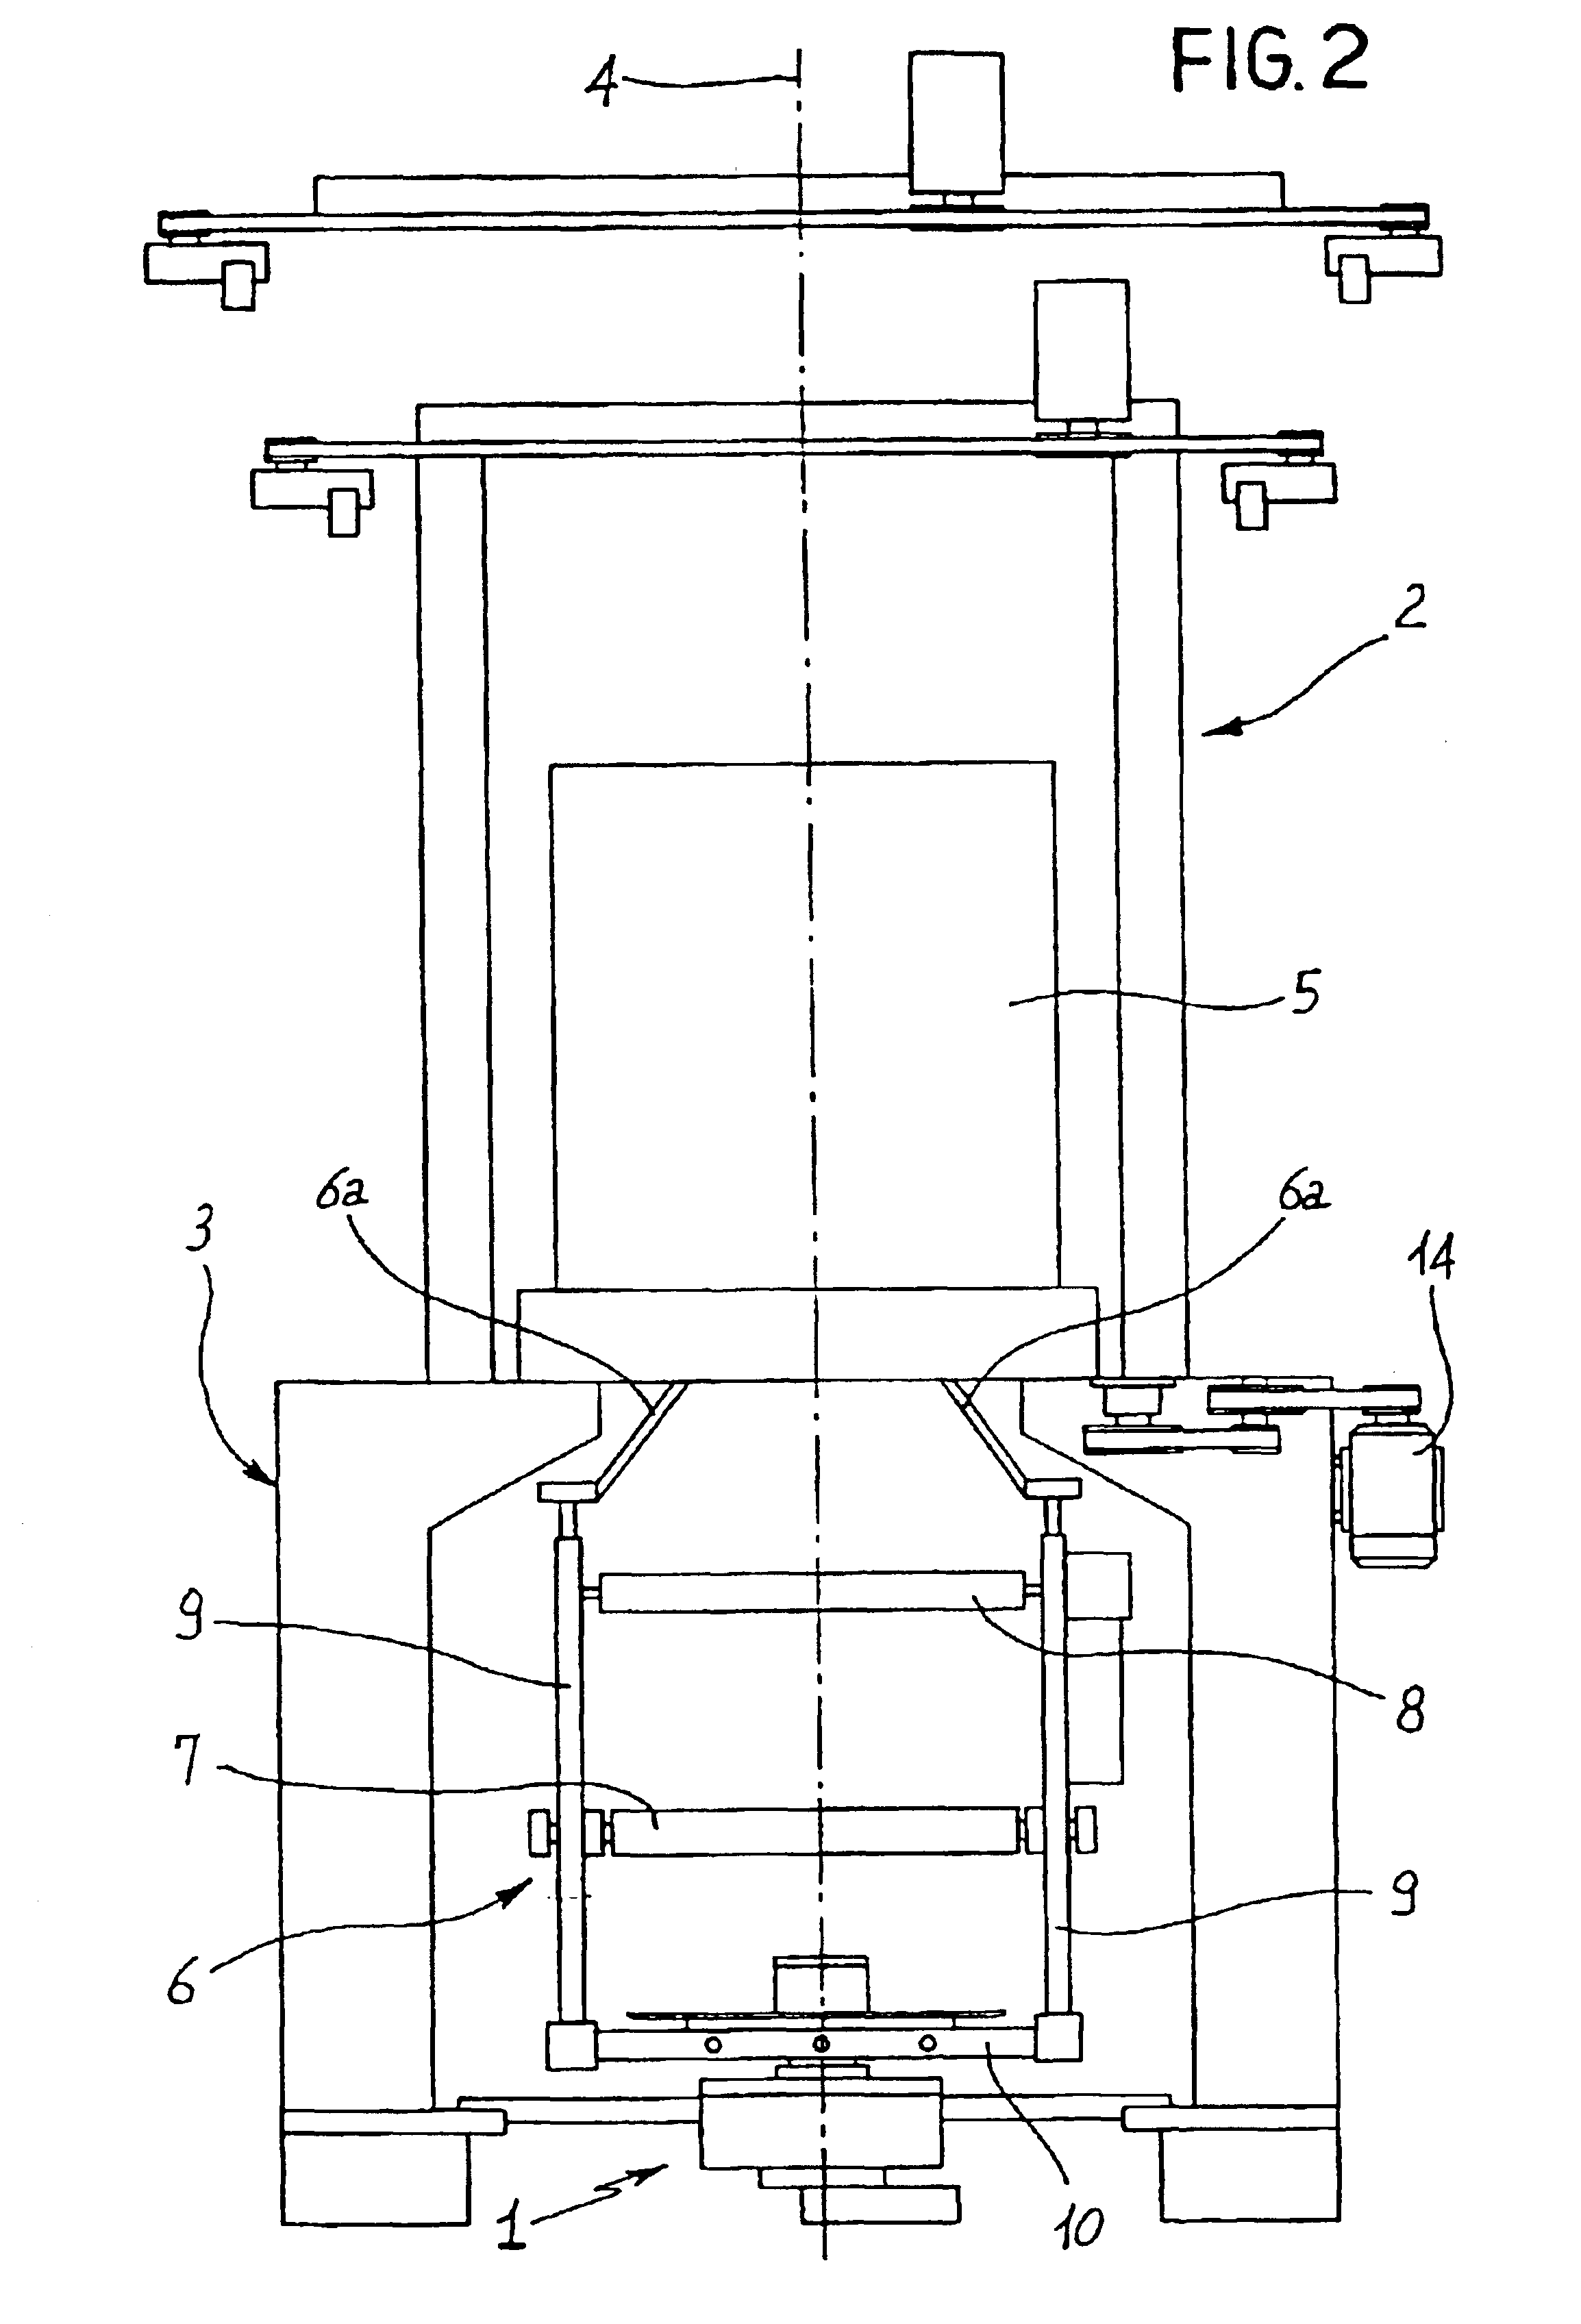 Apparatus and method for controlling the weight of fabric produced by a textile machine, in particular by a circular knitting machine